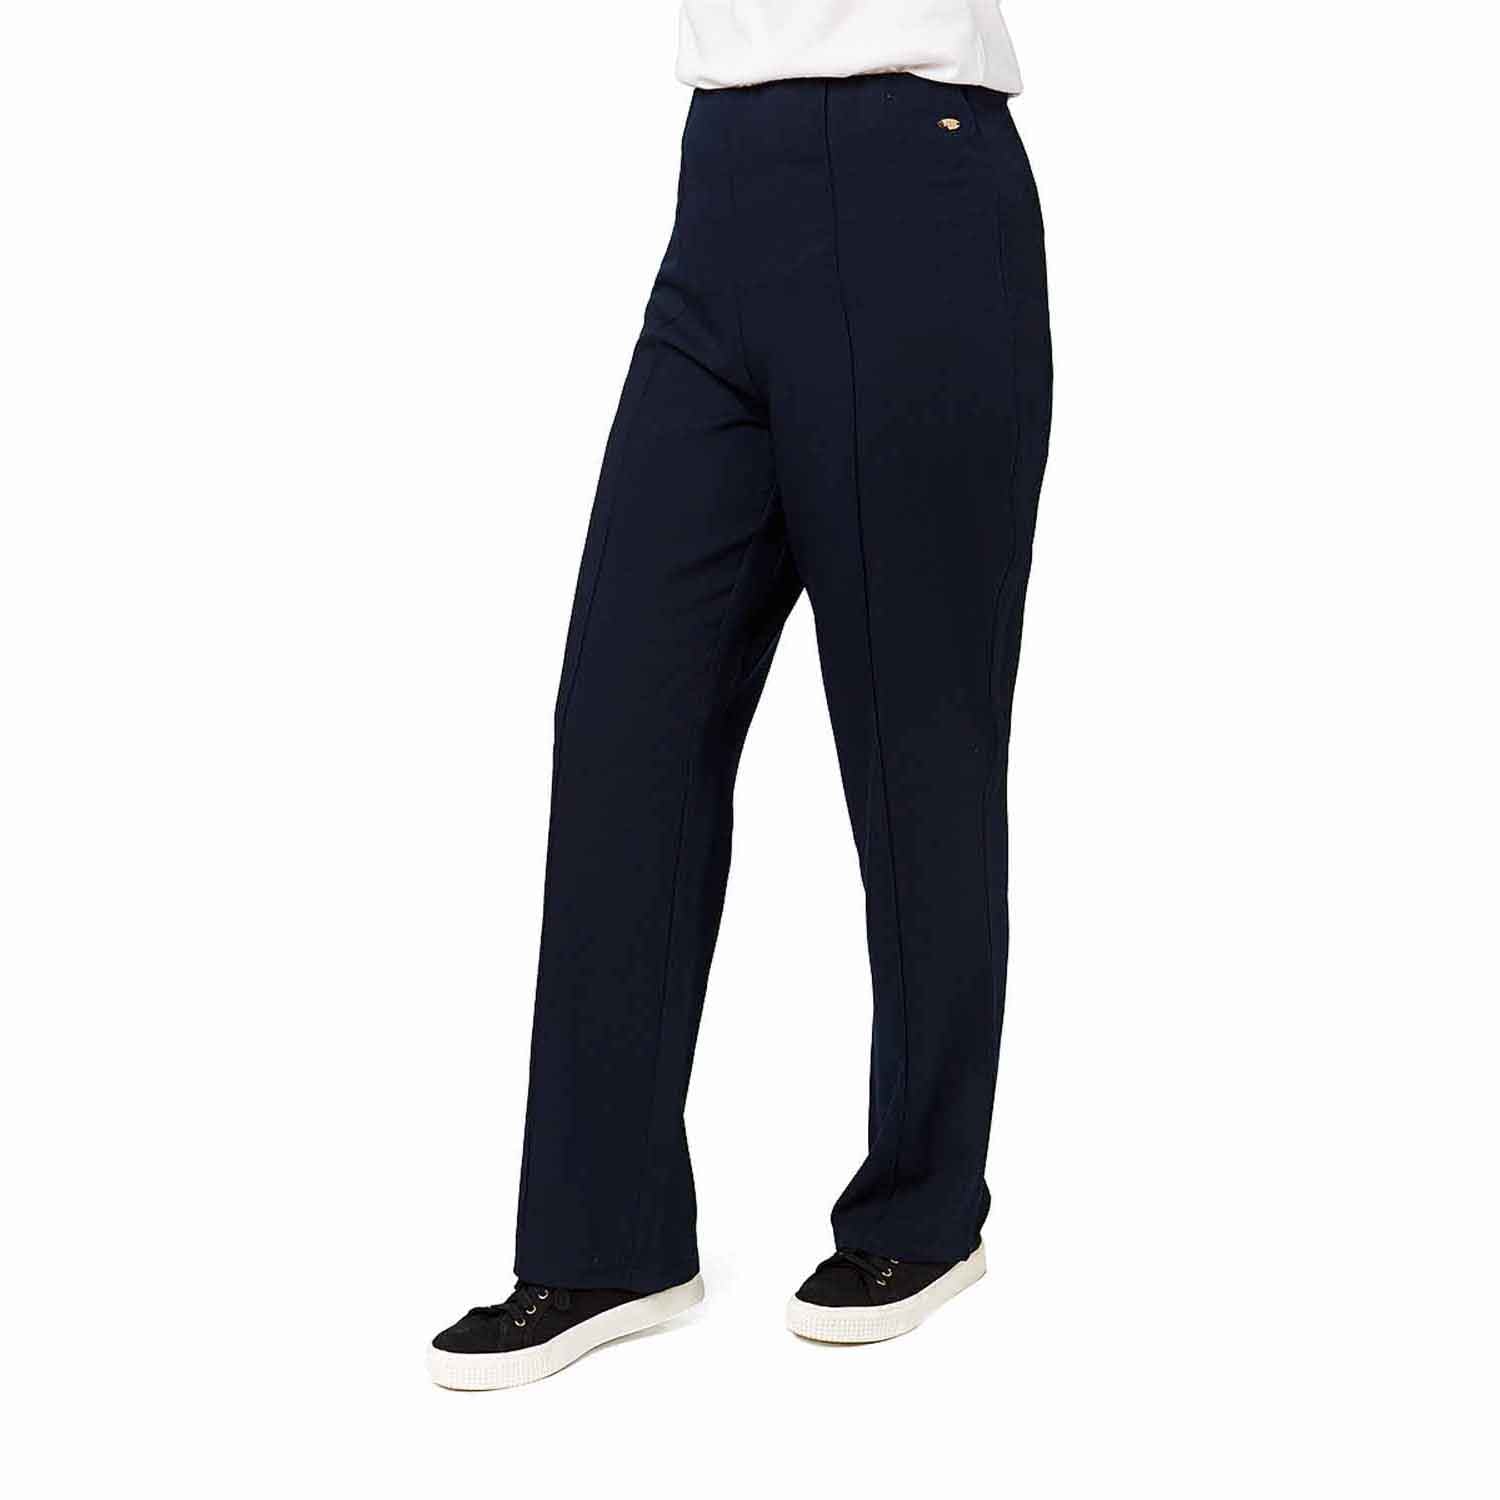 Tigiwear Jersey Light Weight Trousers - Navy 2 Shaws Department Stores